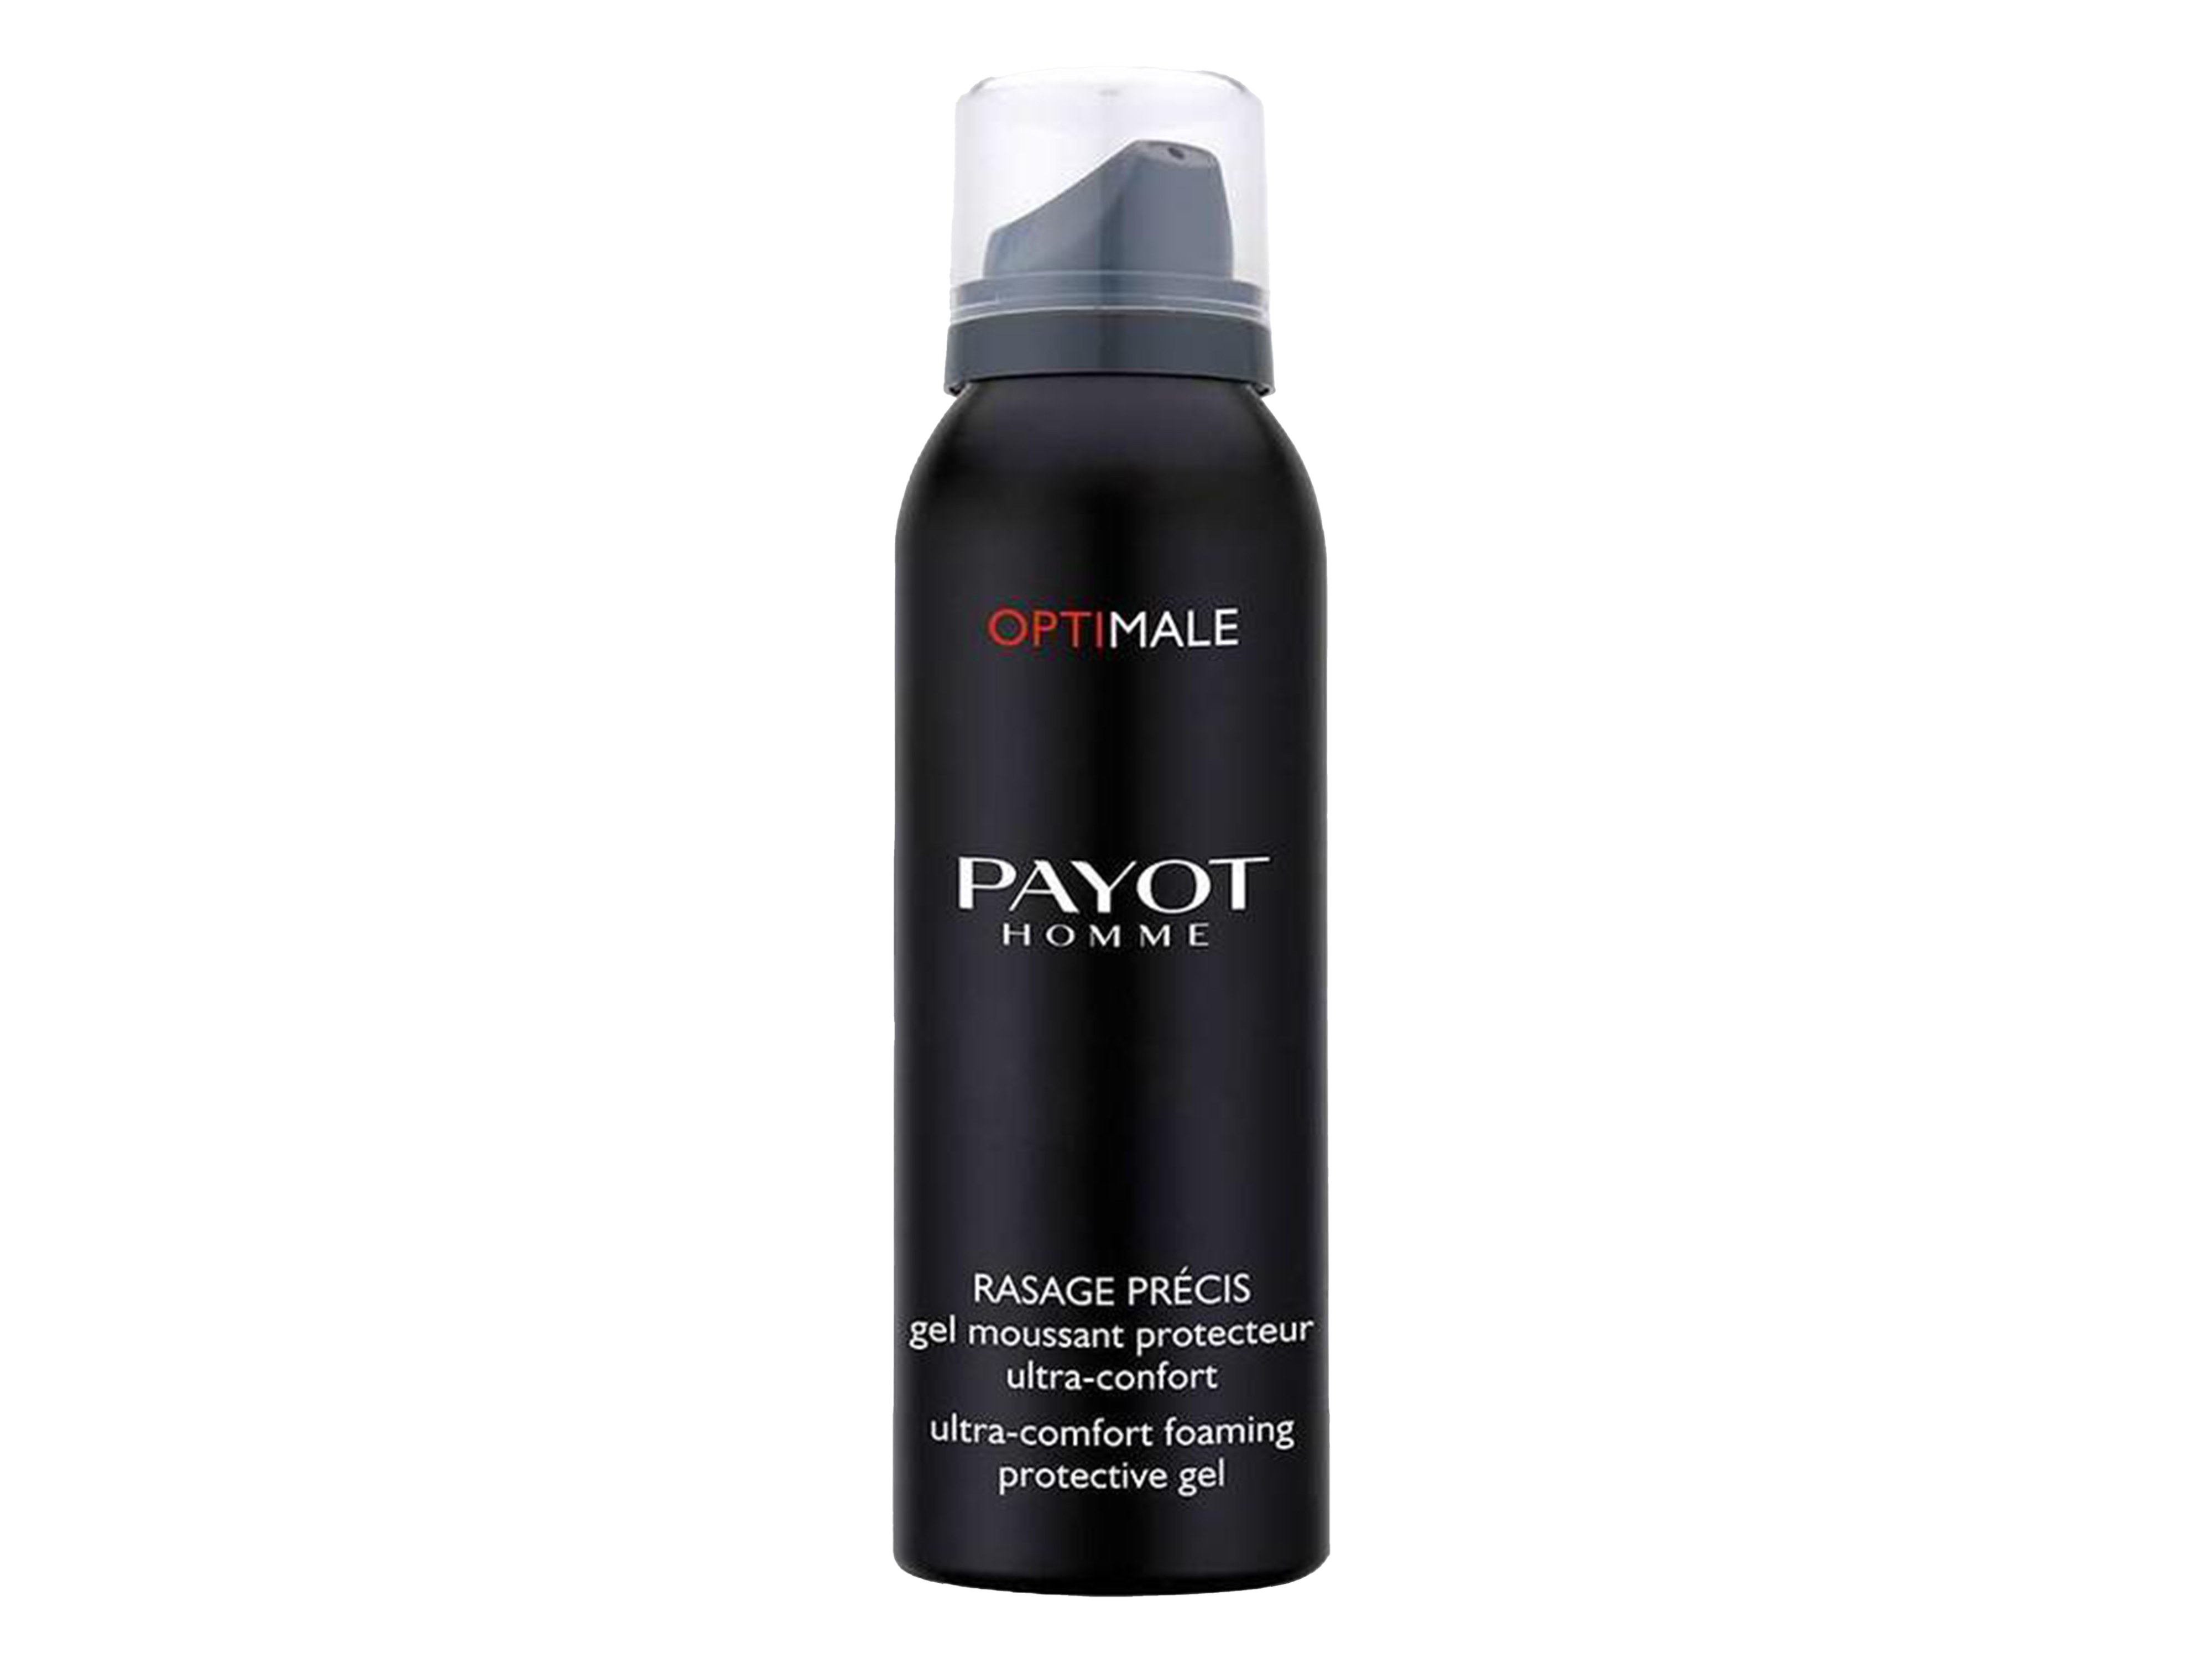 Payot Homme Optimale Rasage Precis, 100 ml